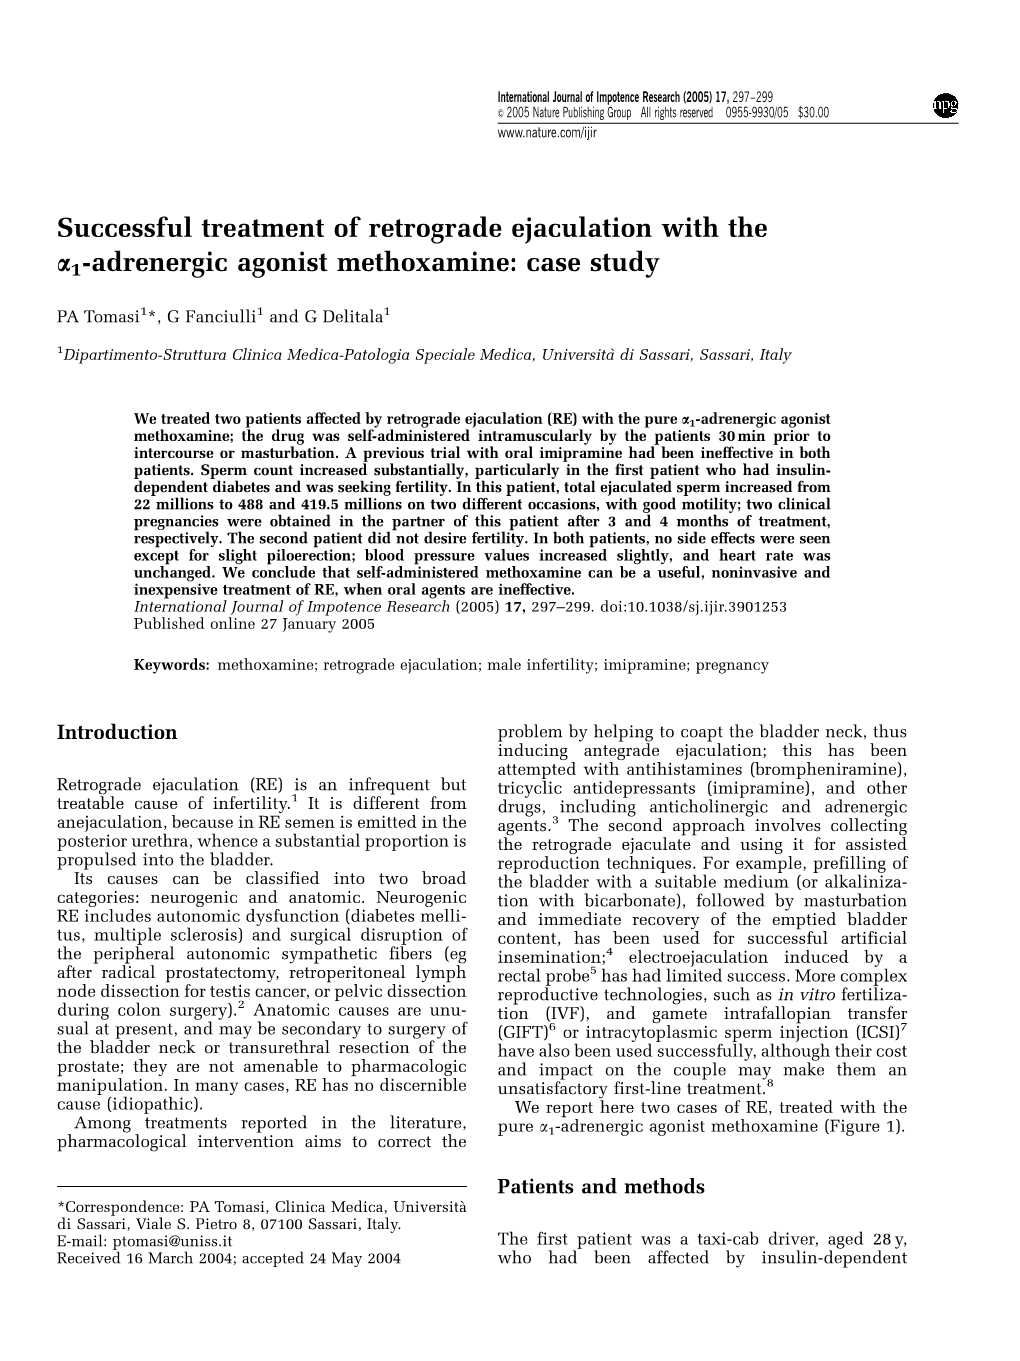 Successful Treatment of Retrograde Ejaculation with the A1-Adrenergic Agonist Methoxamine: Case Study